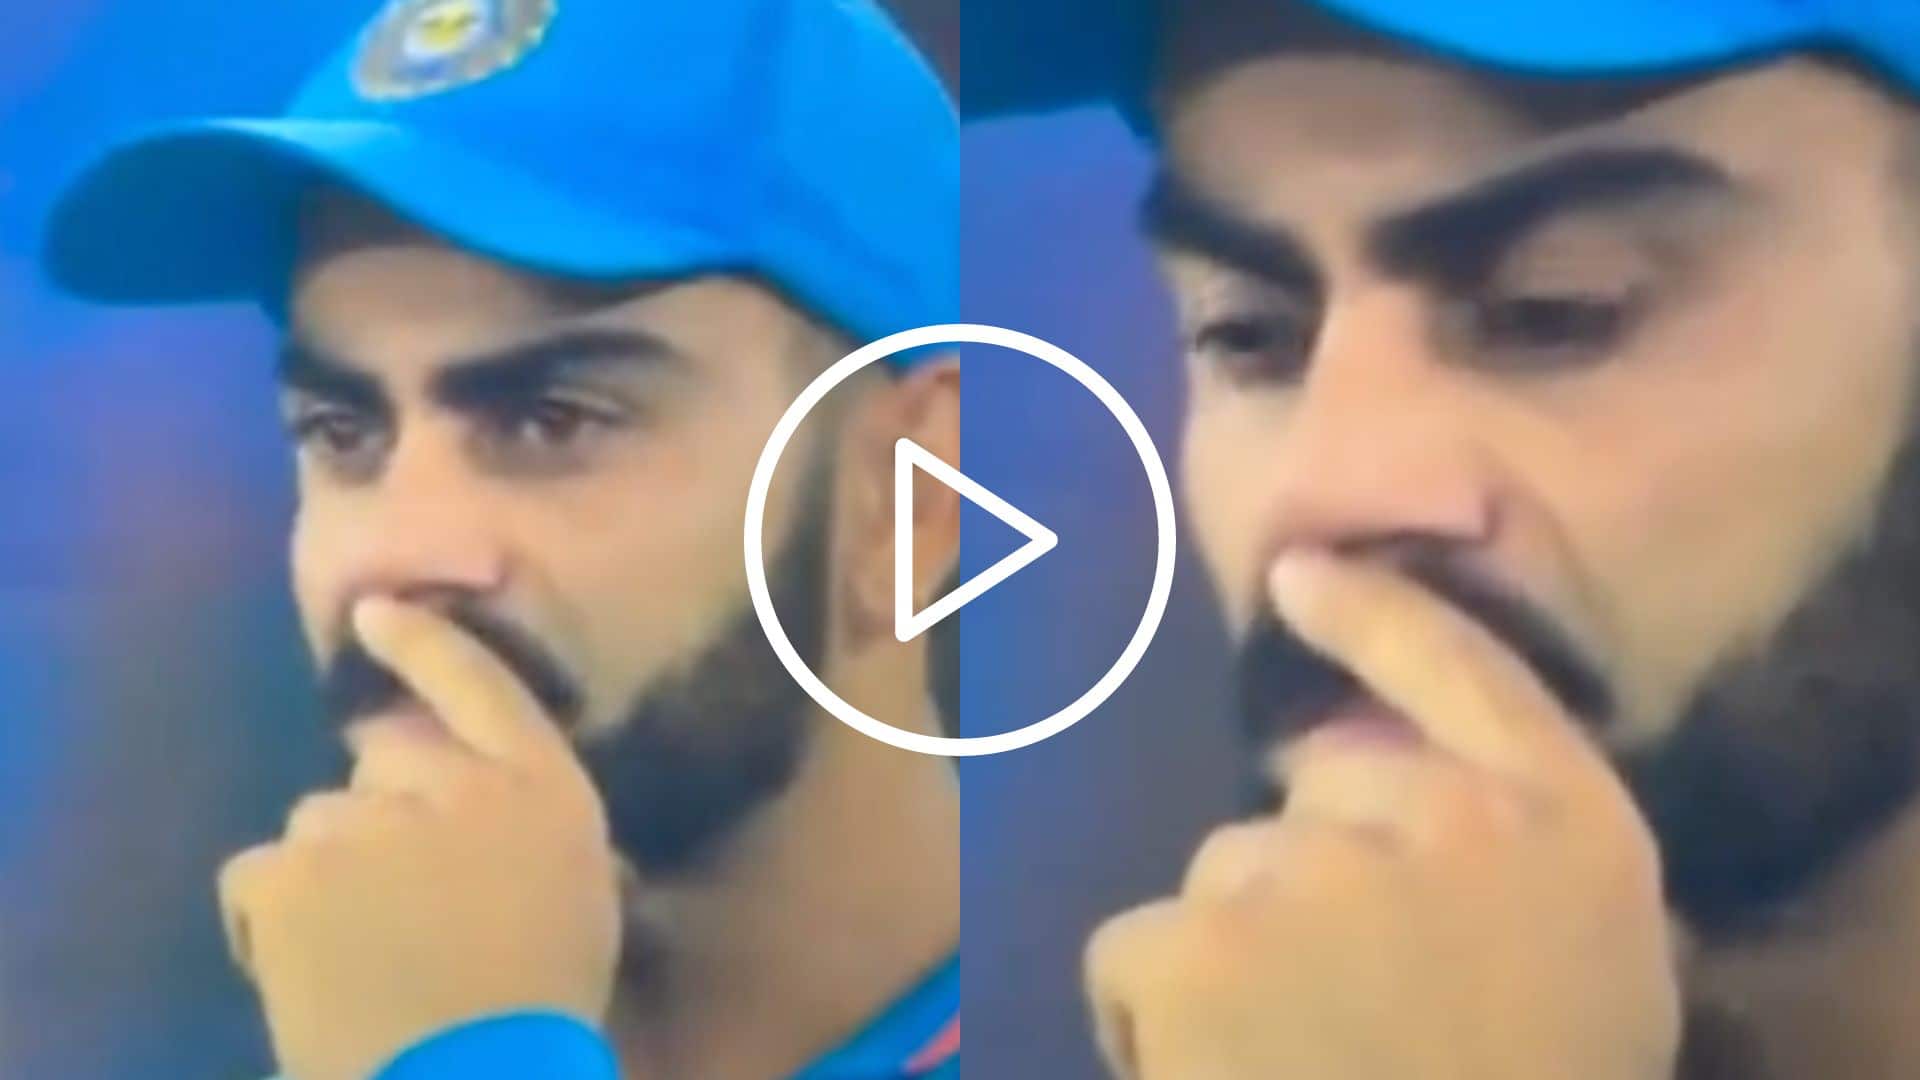 [Watch] Virat Kohli 'Cries' As India Lose To Australia In World Cup Final